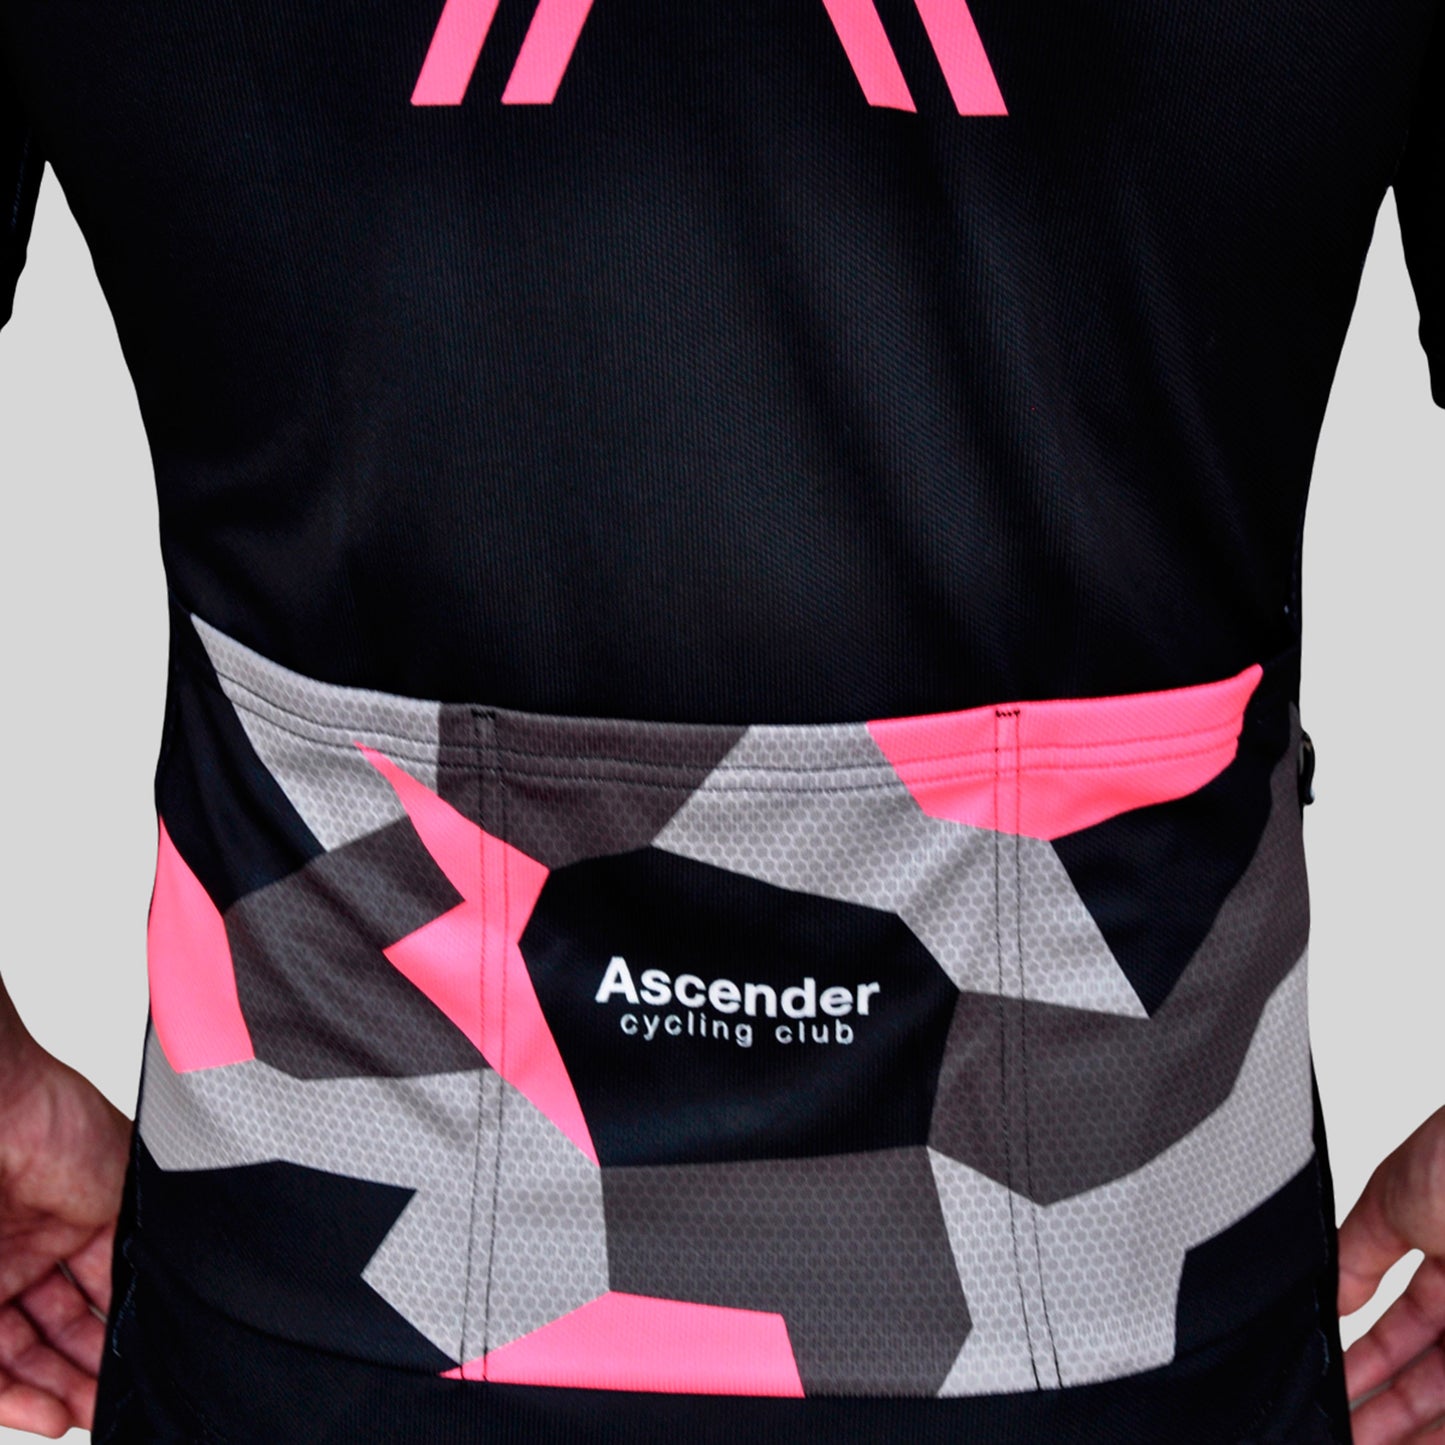 Lightning Bolt Camo Neon Pink Short Sleeves Jersey from Ascender Cycling Club Back Zoom